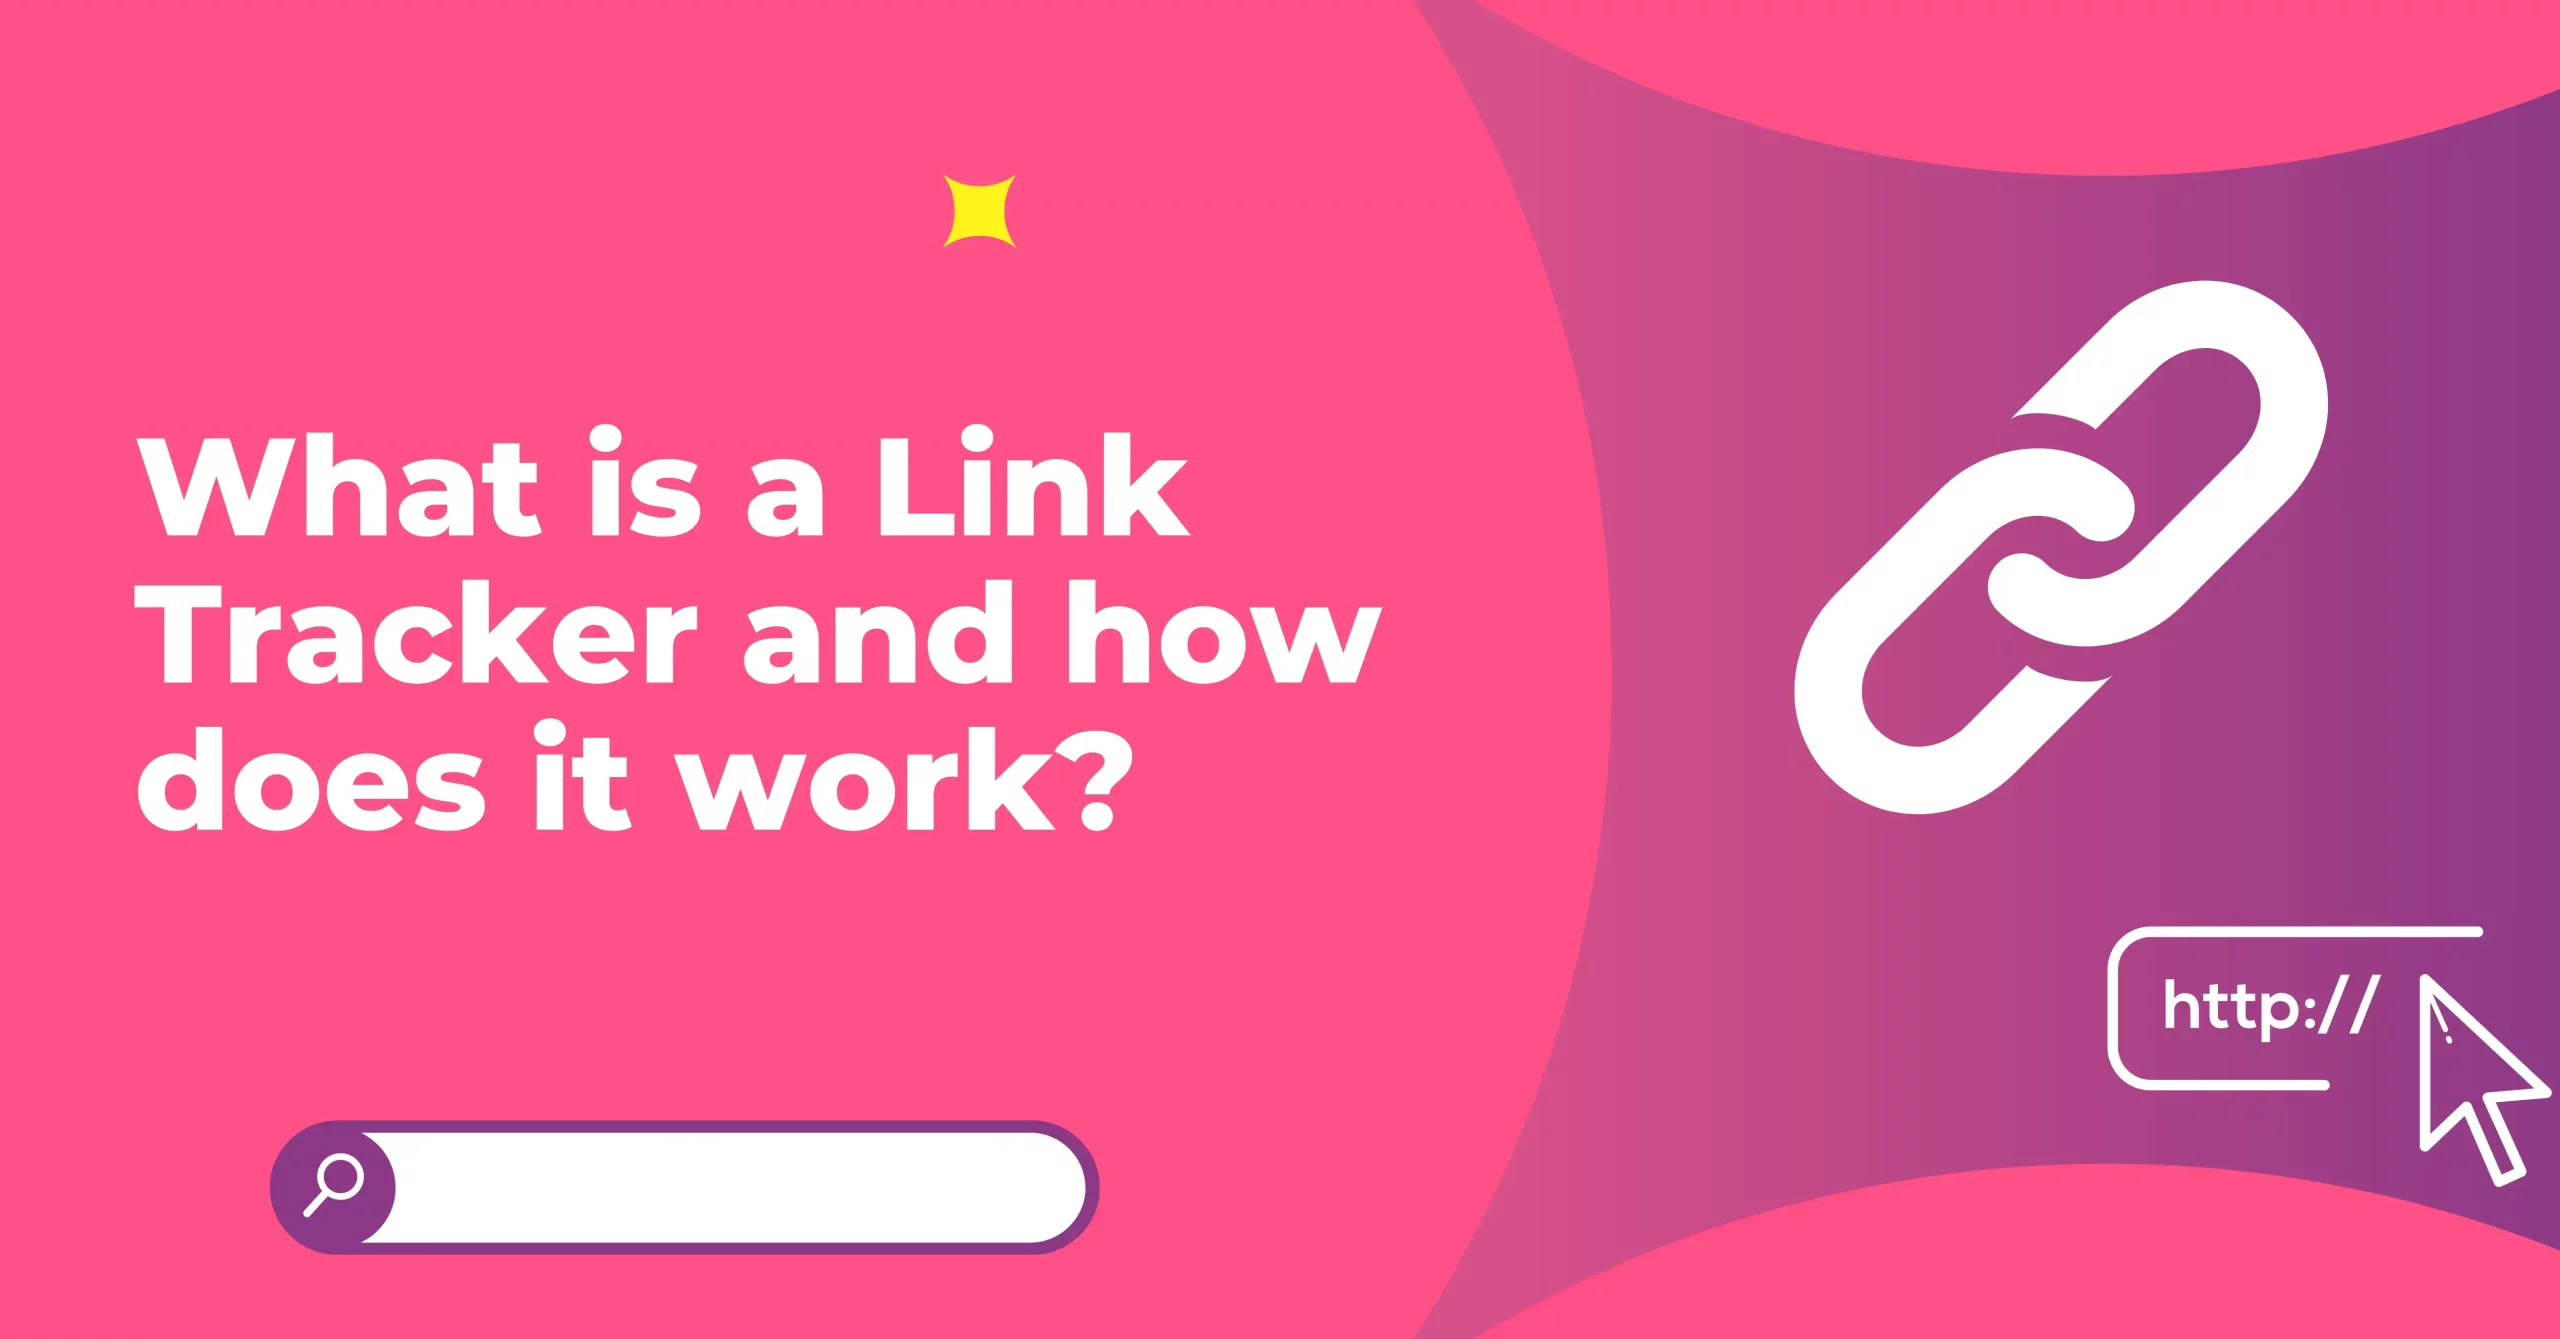 What is a link tracker, and how does it work?